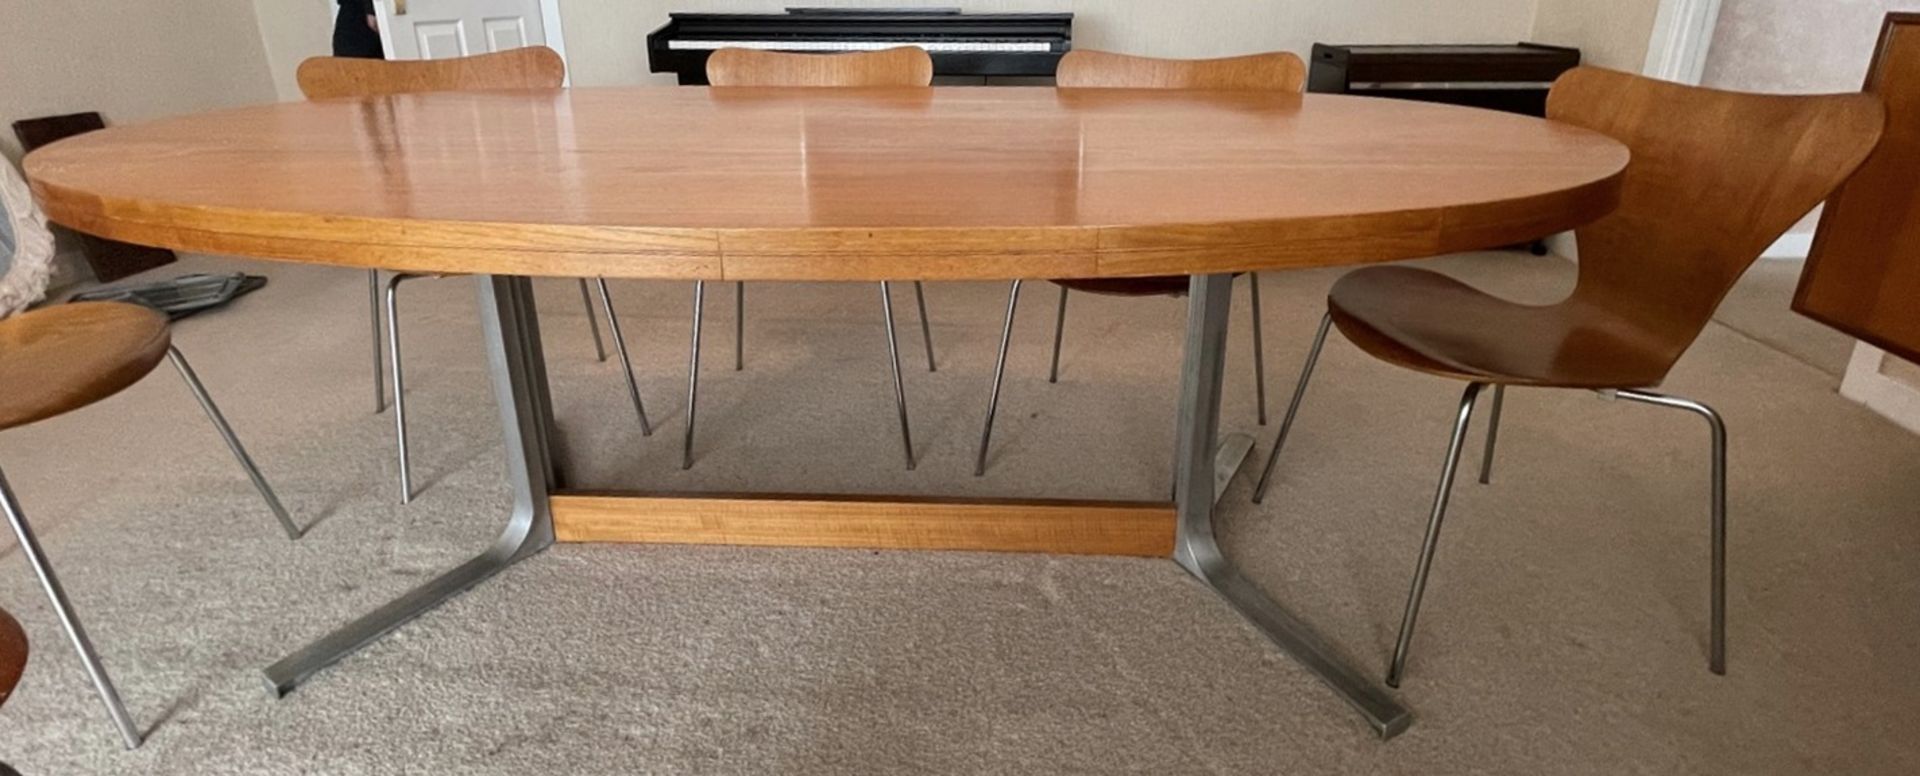 1 x Genuine Vintage FRITZ HANSEN Designer Dining Table With 8 x Chairs - Dated 1970 - Image 8 of 17